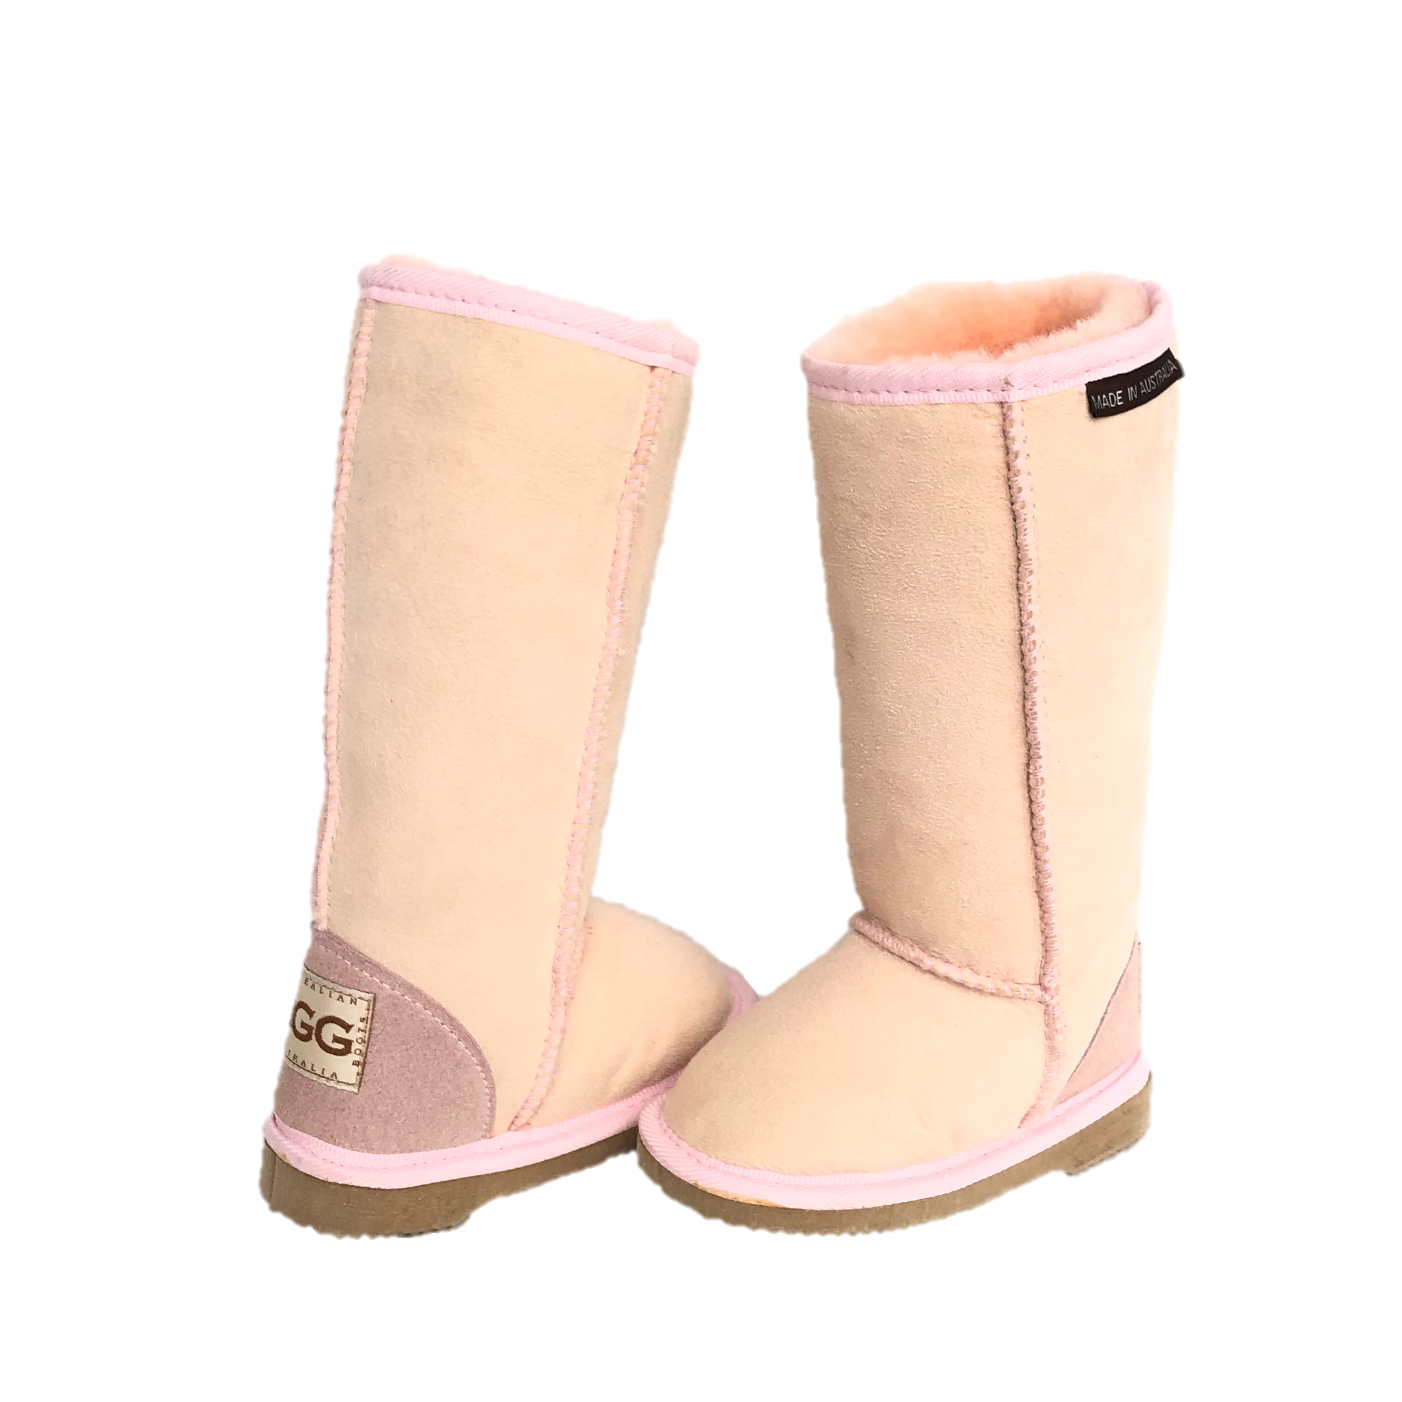 CLEARANCE KIDS CLASSIC TALL BOOTS PALE PINK - AU KIDS 6 (approx. 2 year old)